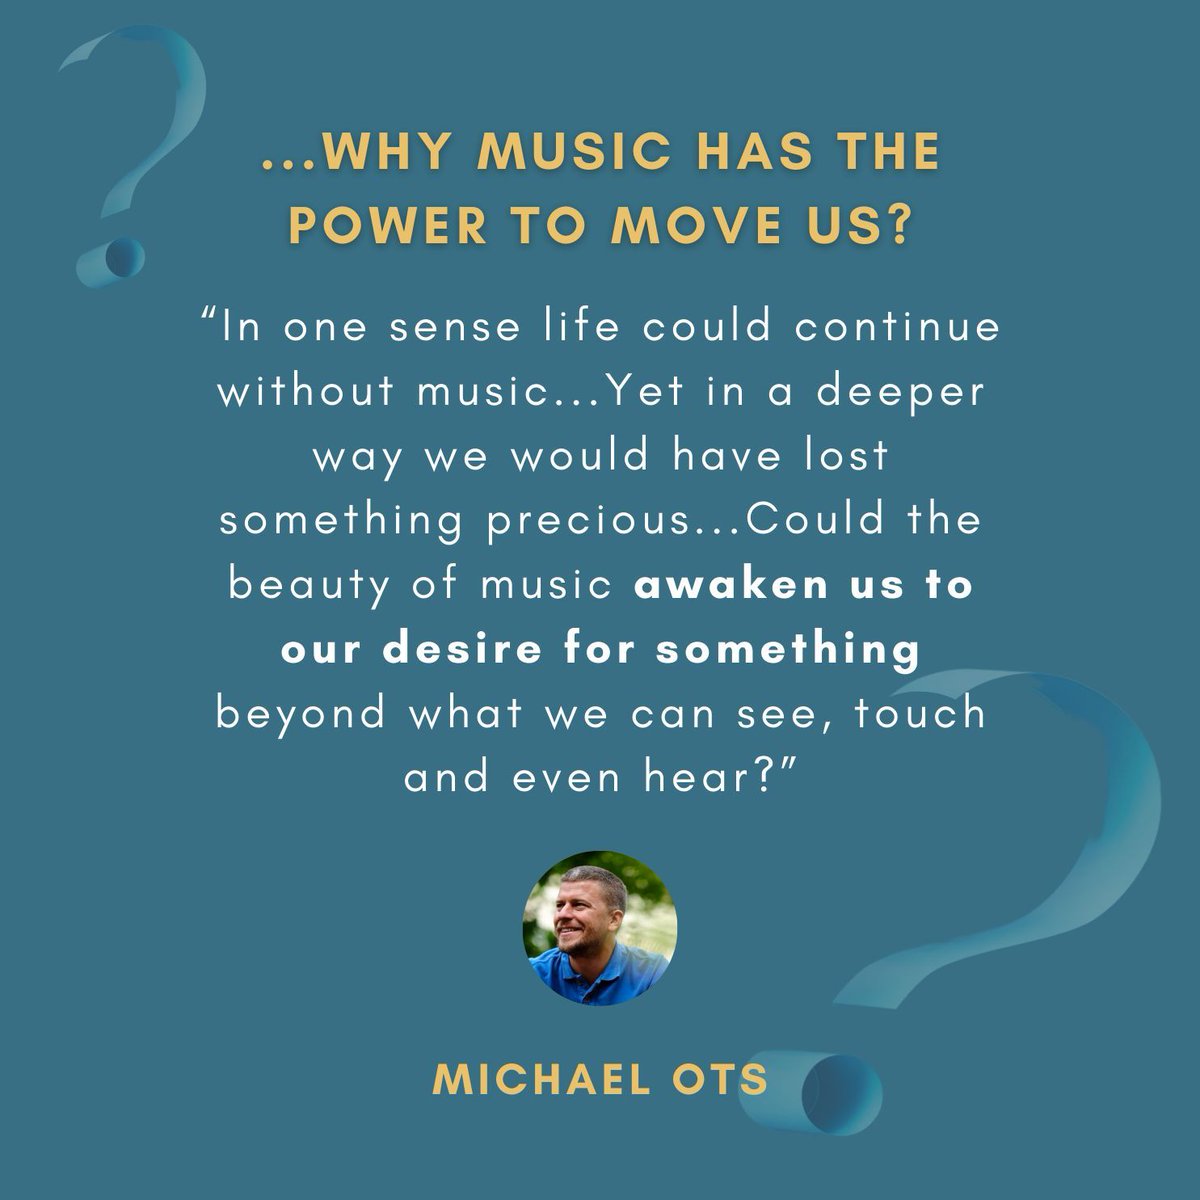 Why does music move us? This is just one of the many questions that the new book 'Have You Ever Wondered?' digs into to get readers thinking about deeper spiritual questions. Find out more at buff.ly/3UpP7sx — a great gift for friends to start conversations.